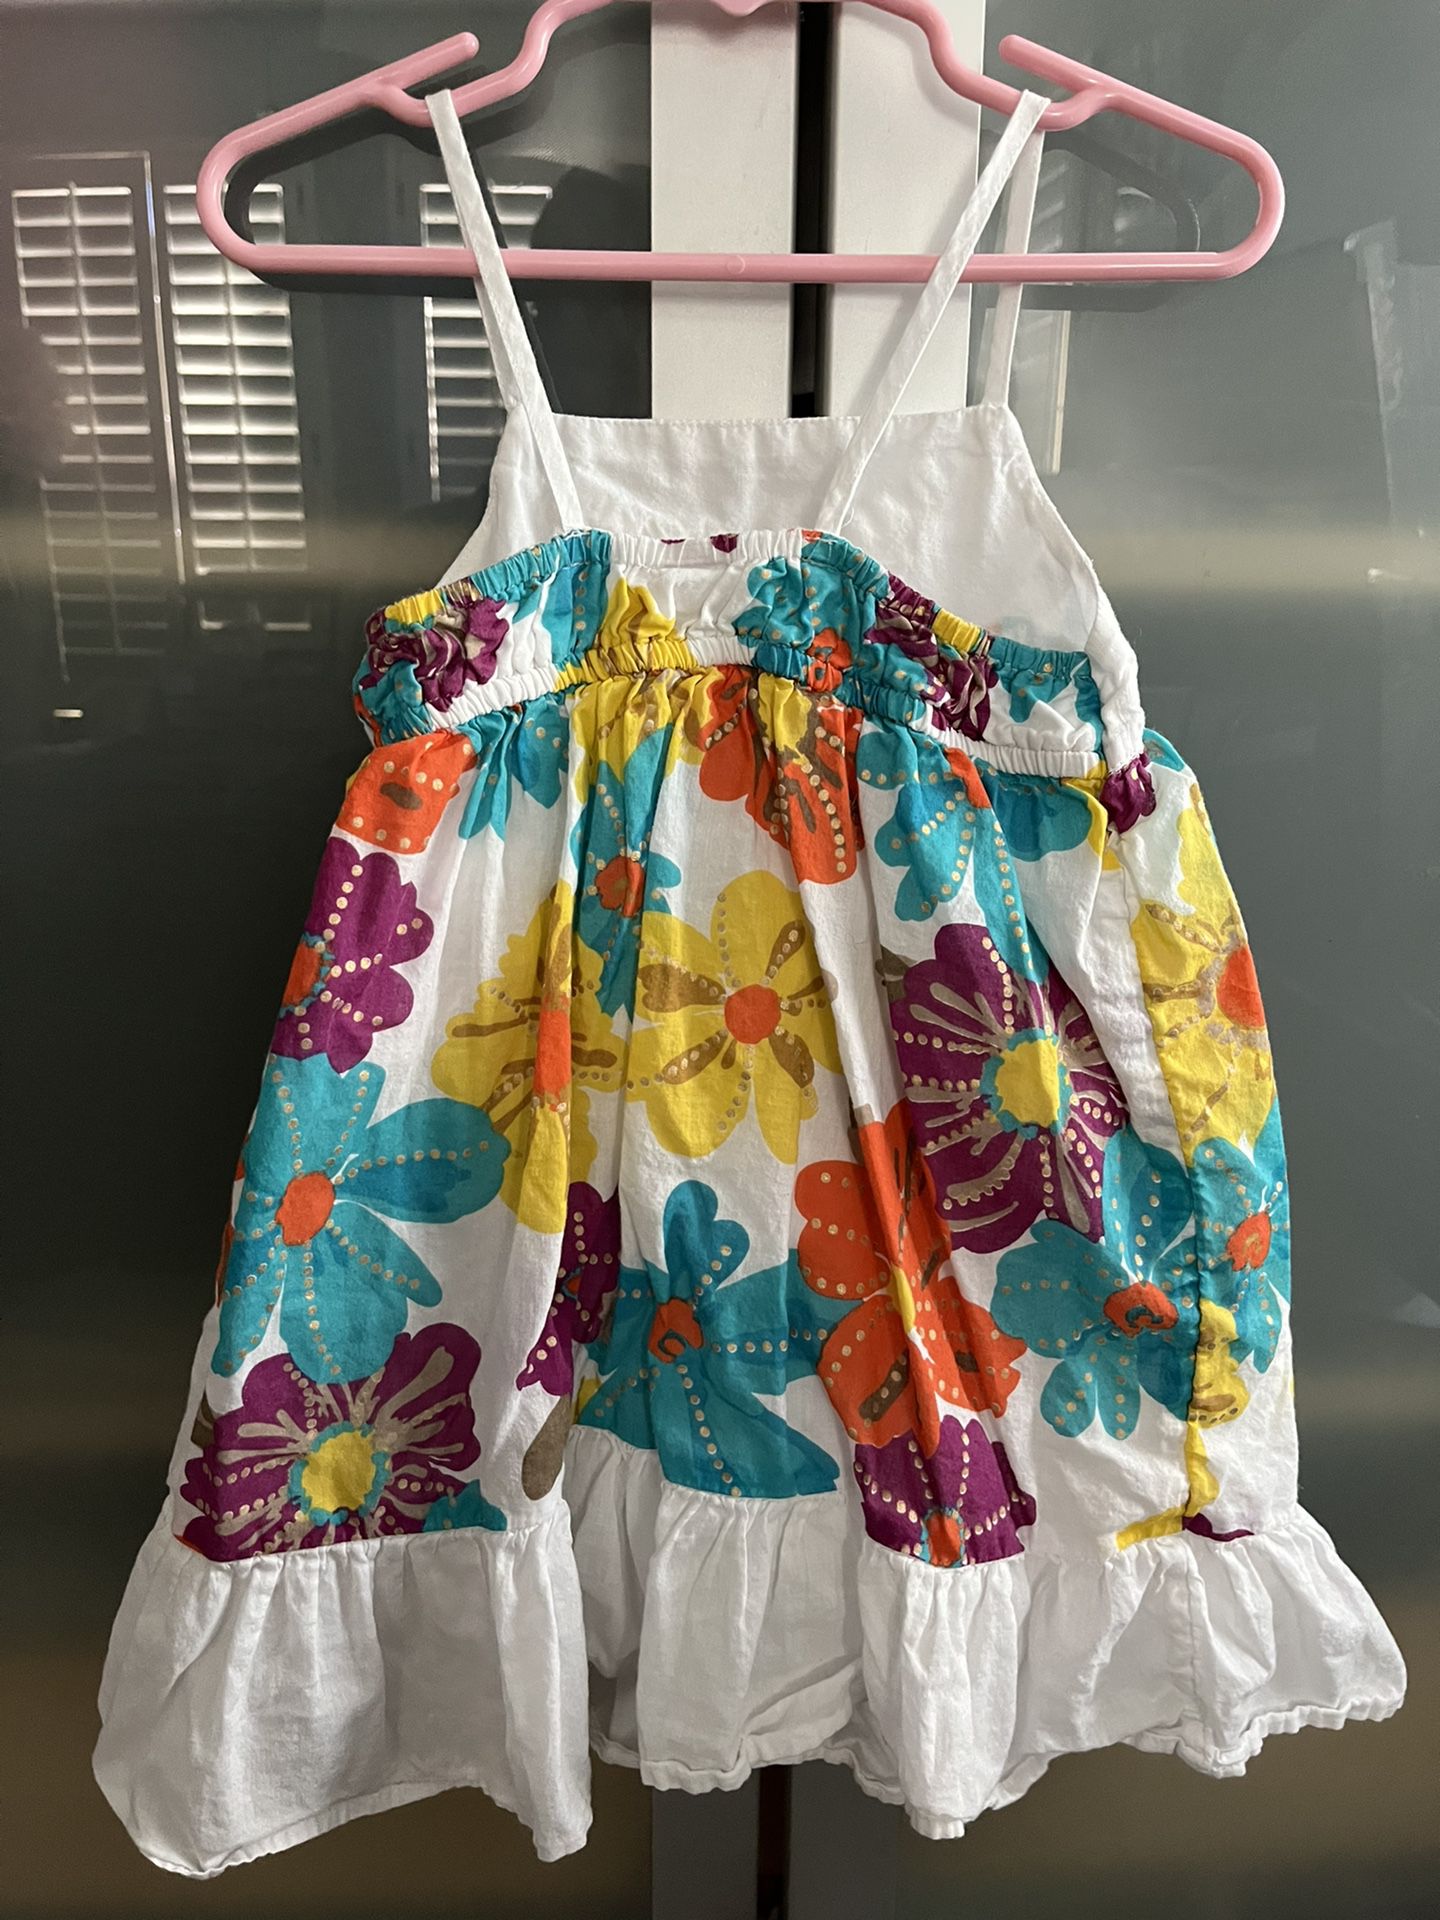 OLD NAVY Girls 3T Sundress Lined Floral Bright 100% Cotton CUTE Multicolored White Ruffle